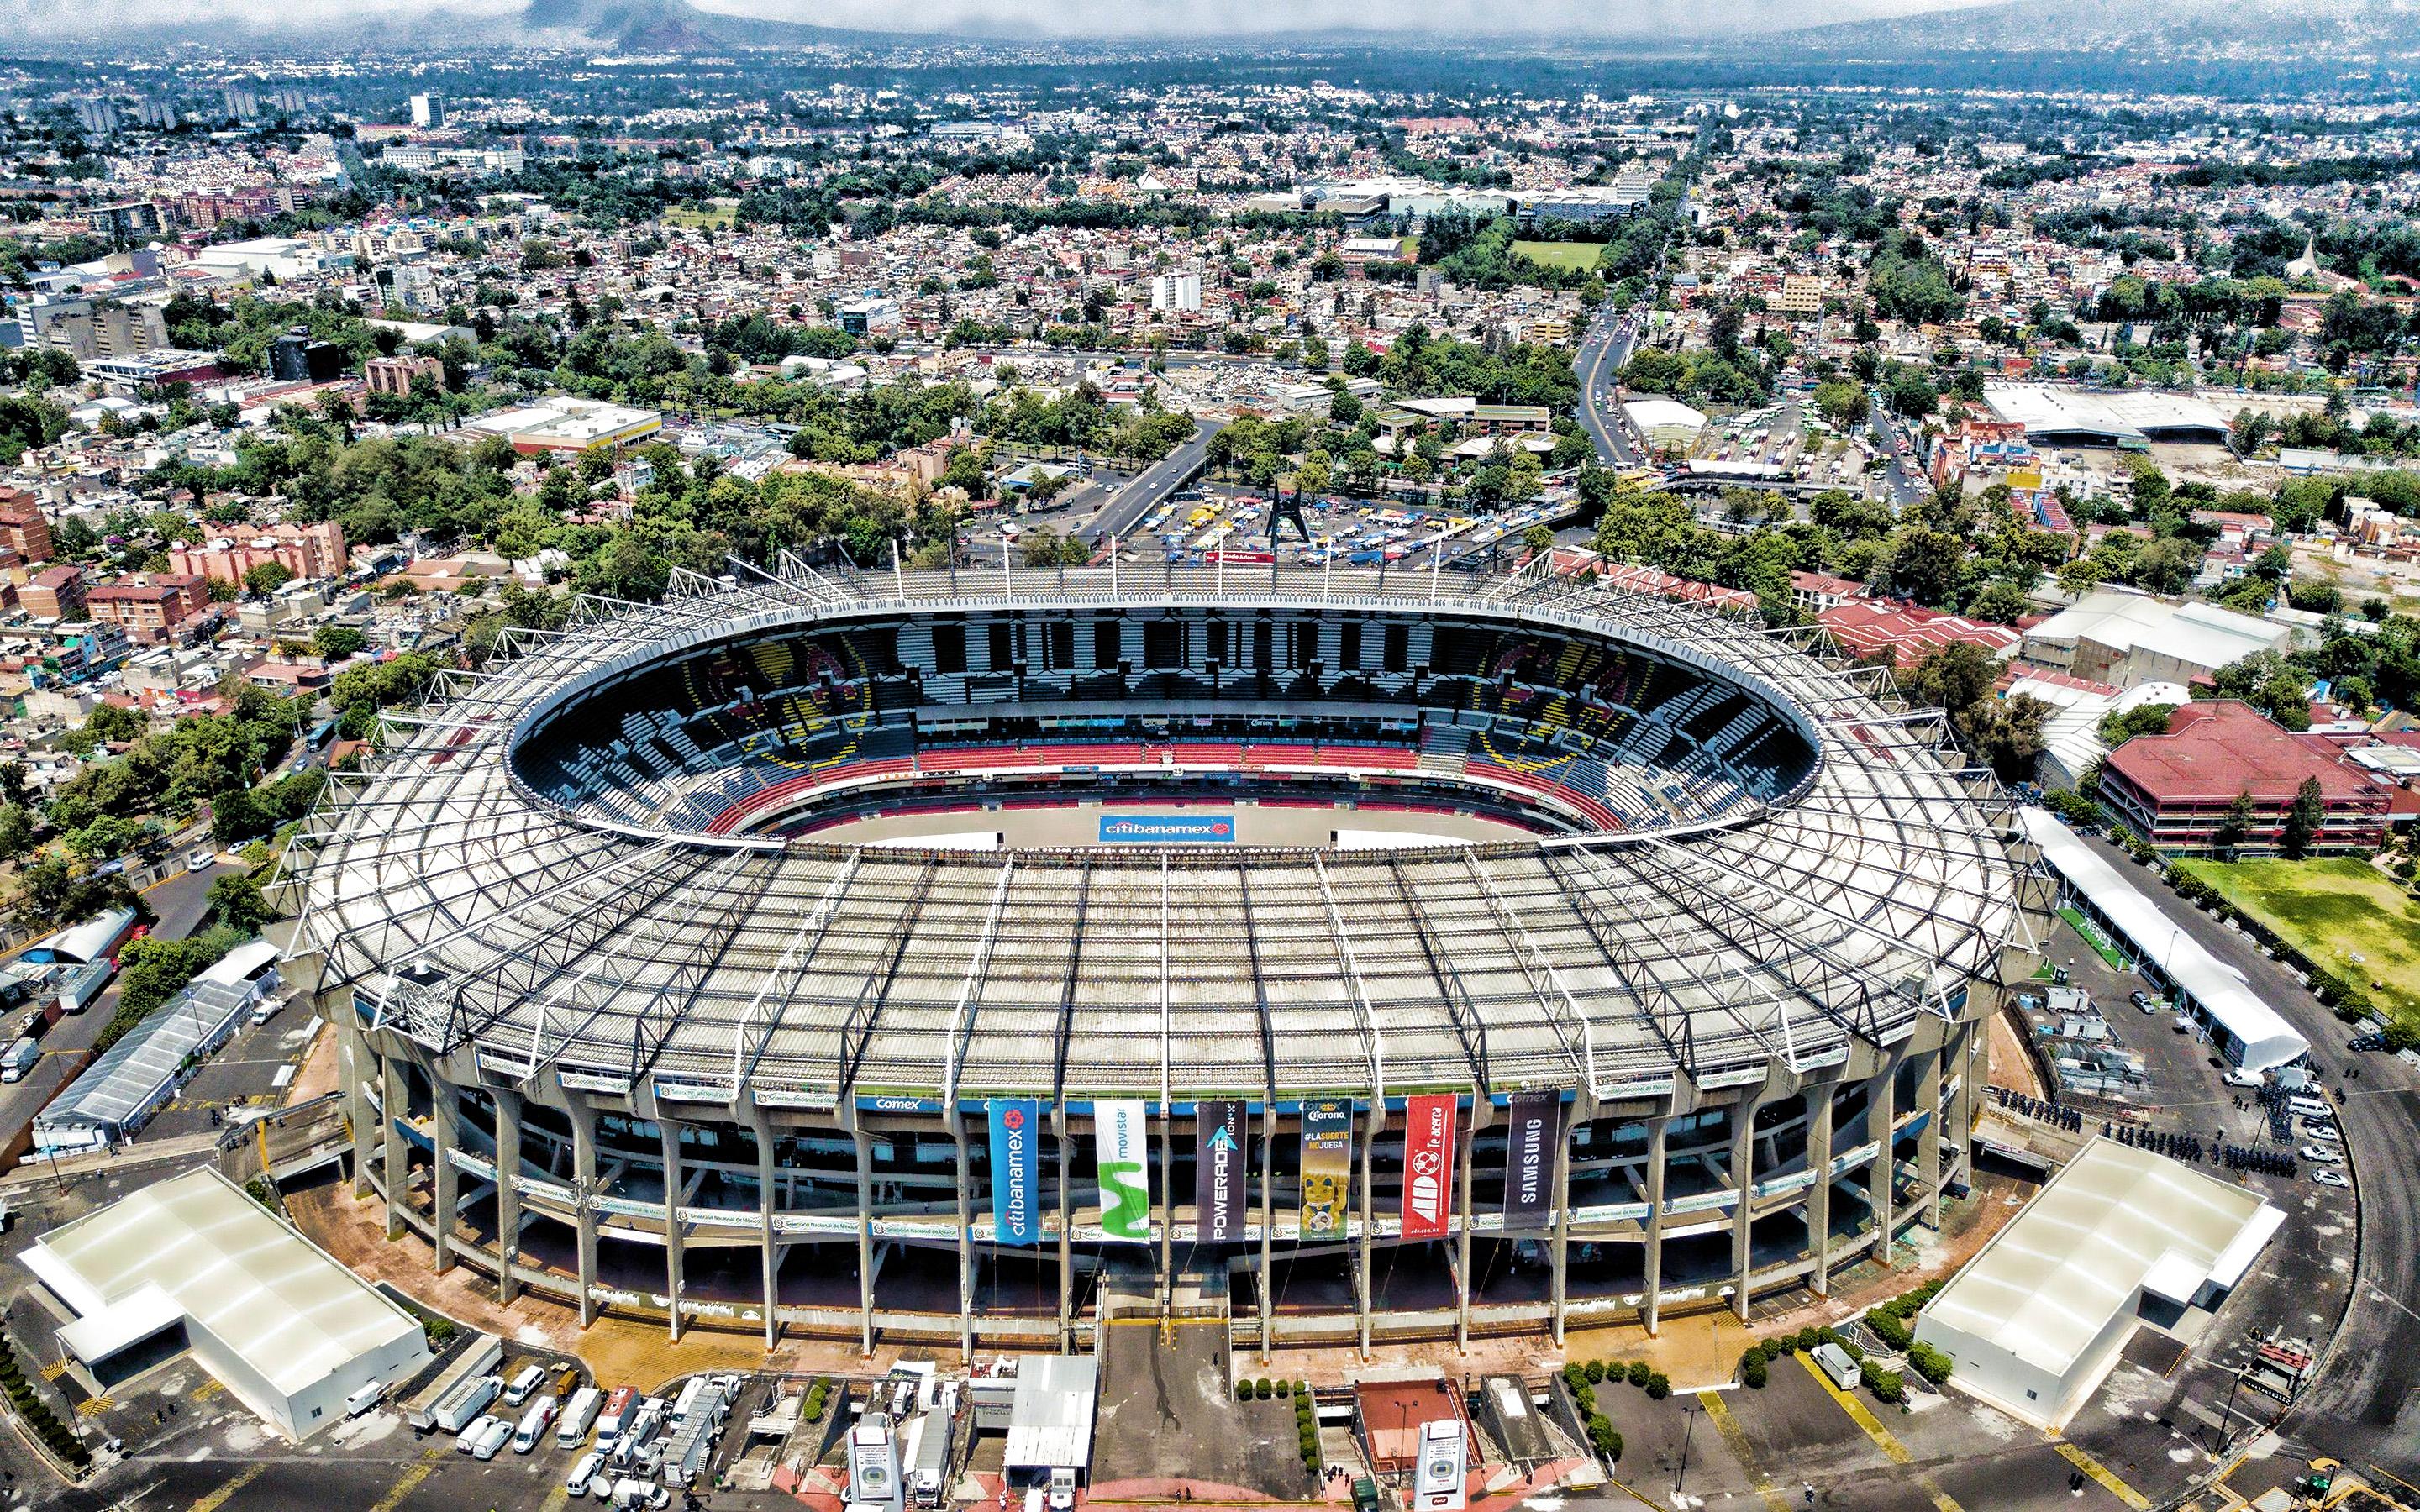 Download wallpaper Estadio Azteca, aerial view, soccer, Azteca Stadium, HDR, football stadium, Mexico City, Mexico, mexican stadiums for desktop with resolution 2880x1800. High Quality HD picture wallpaper